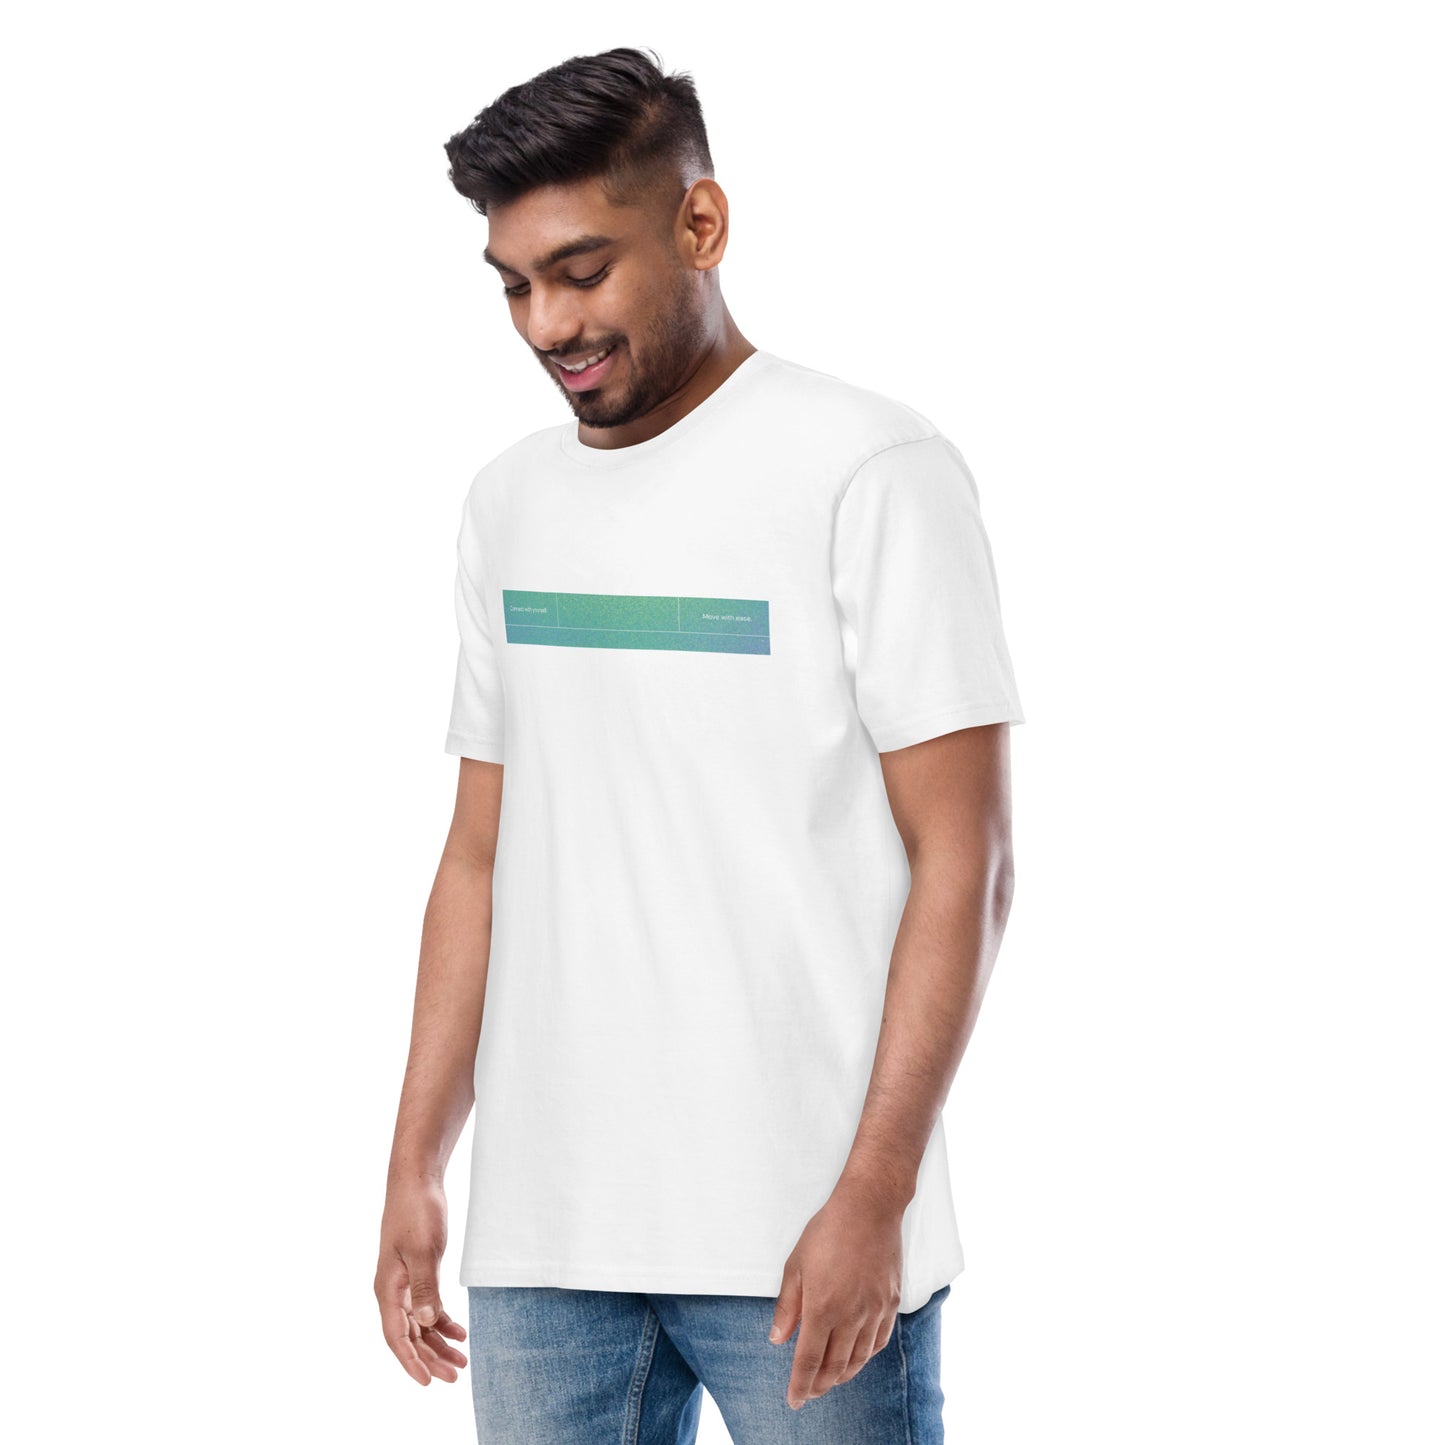 Connect with Yourself Tee